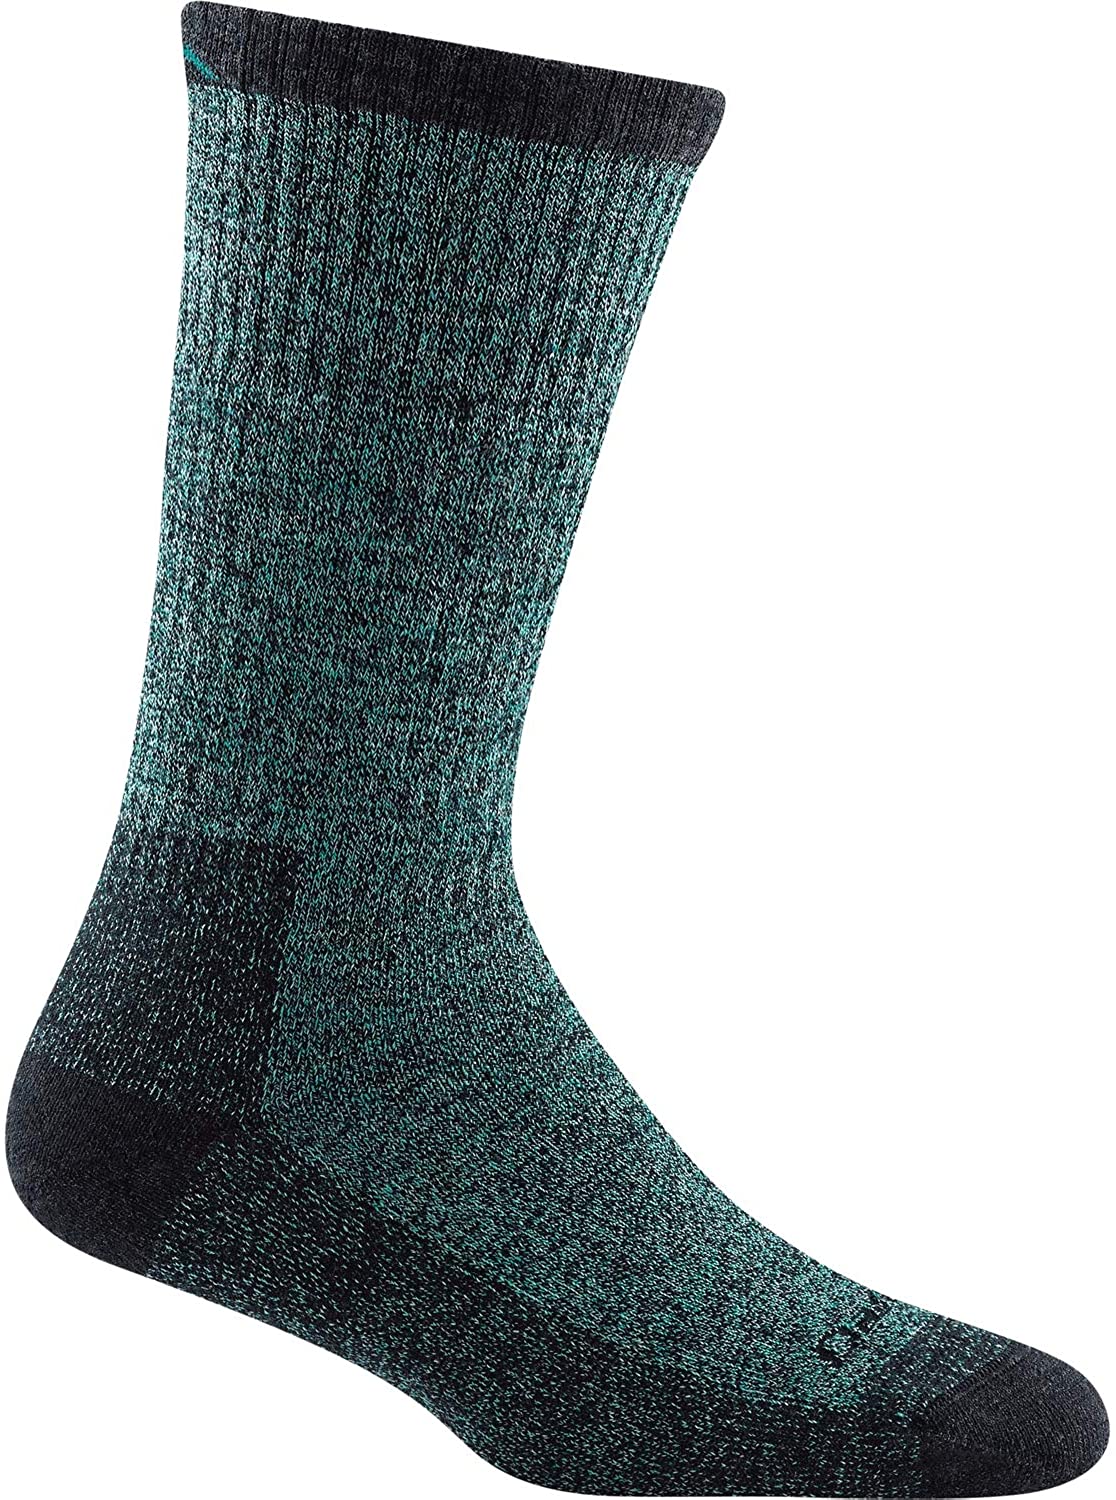 Women's Nomad Boot Midweight With Full Cushion Sock in Aqua